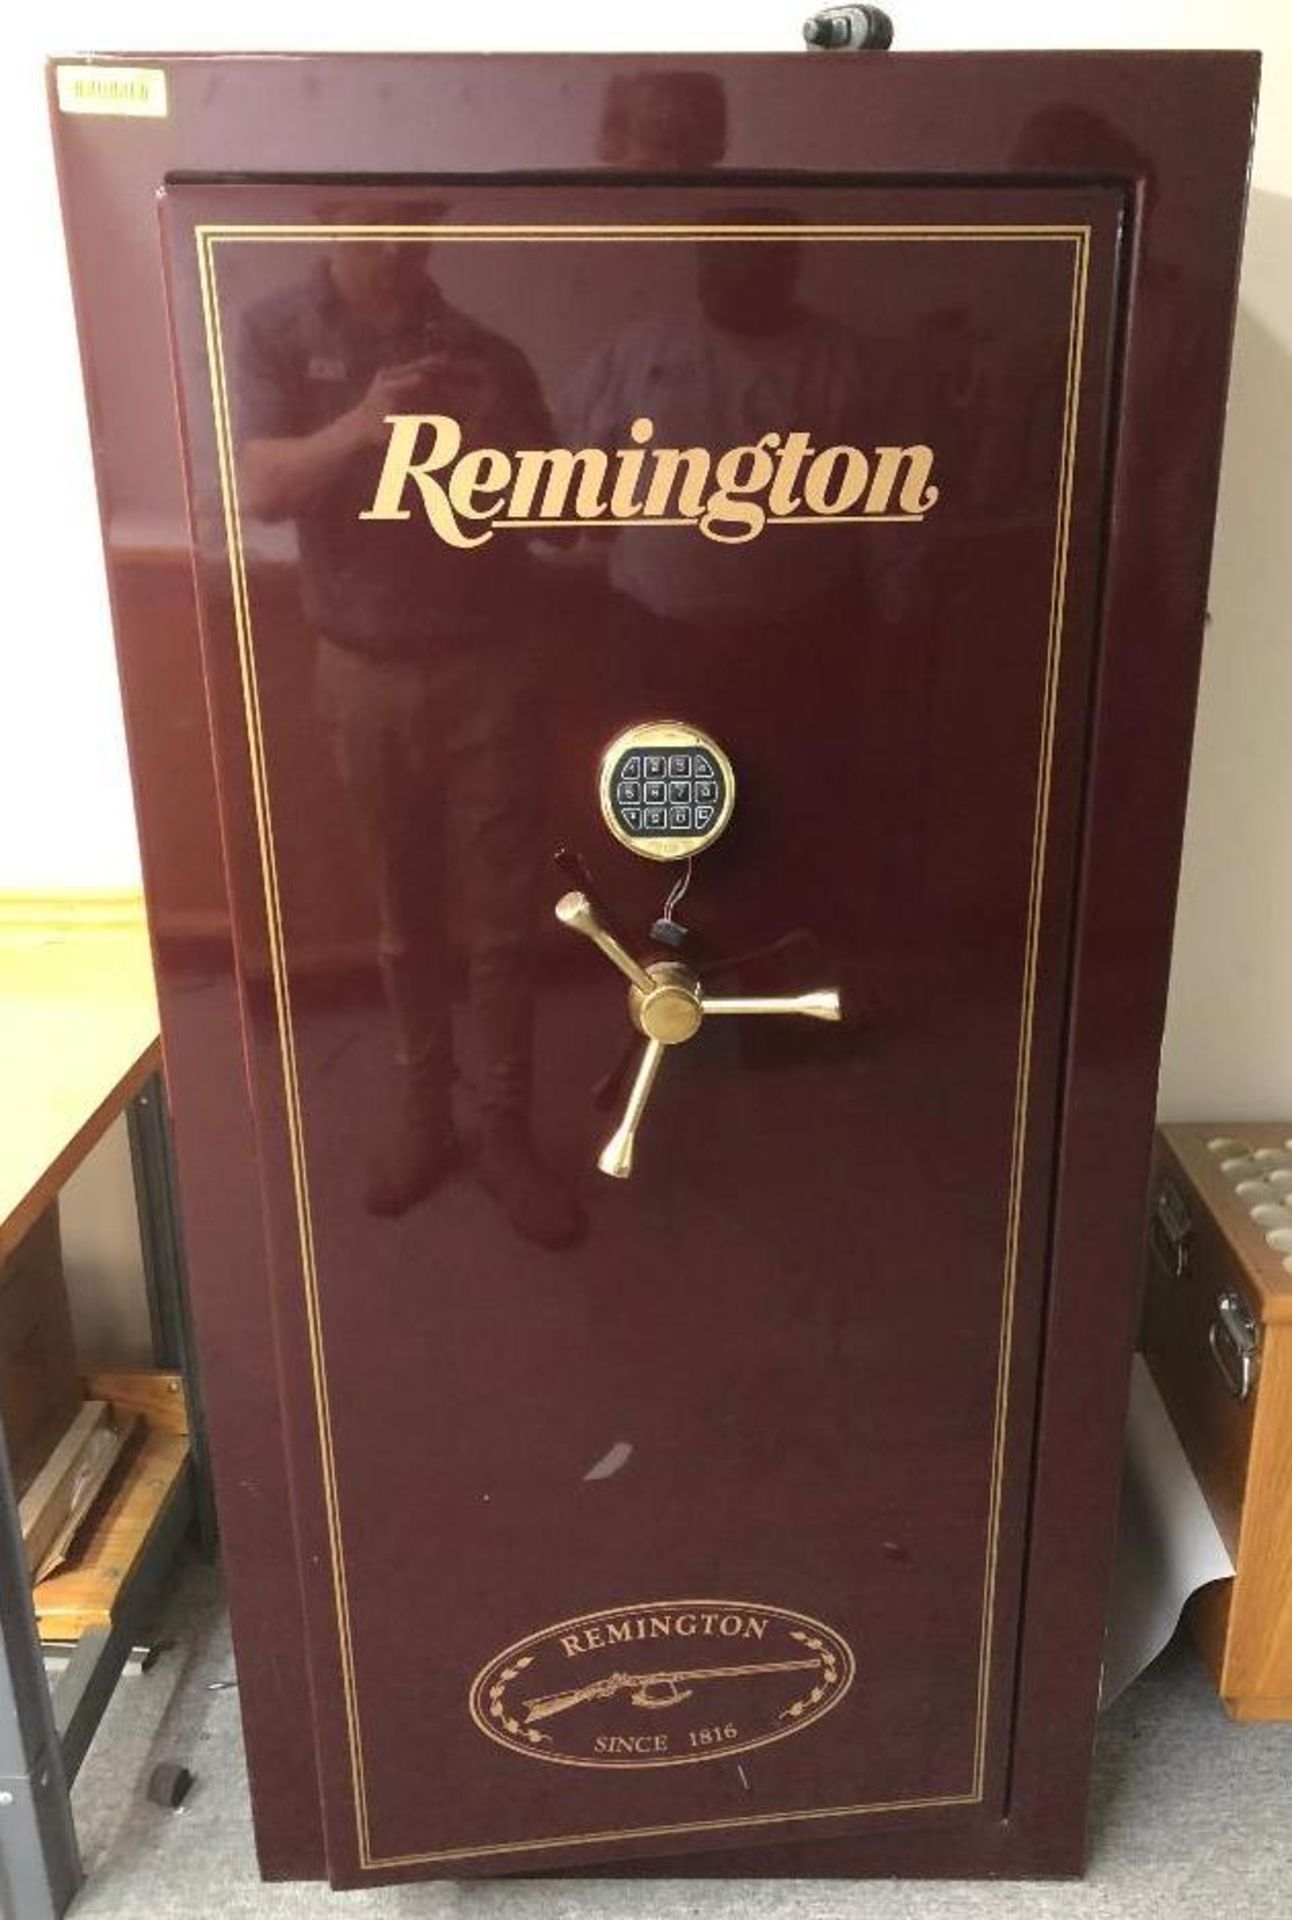 DESCRIPTION: REMINTON R23 GUN SAFE (SELLER DOES NOT HAVE COMBO, BUT SAFE IS OPEN AND CAN BE REPROGRA